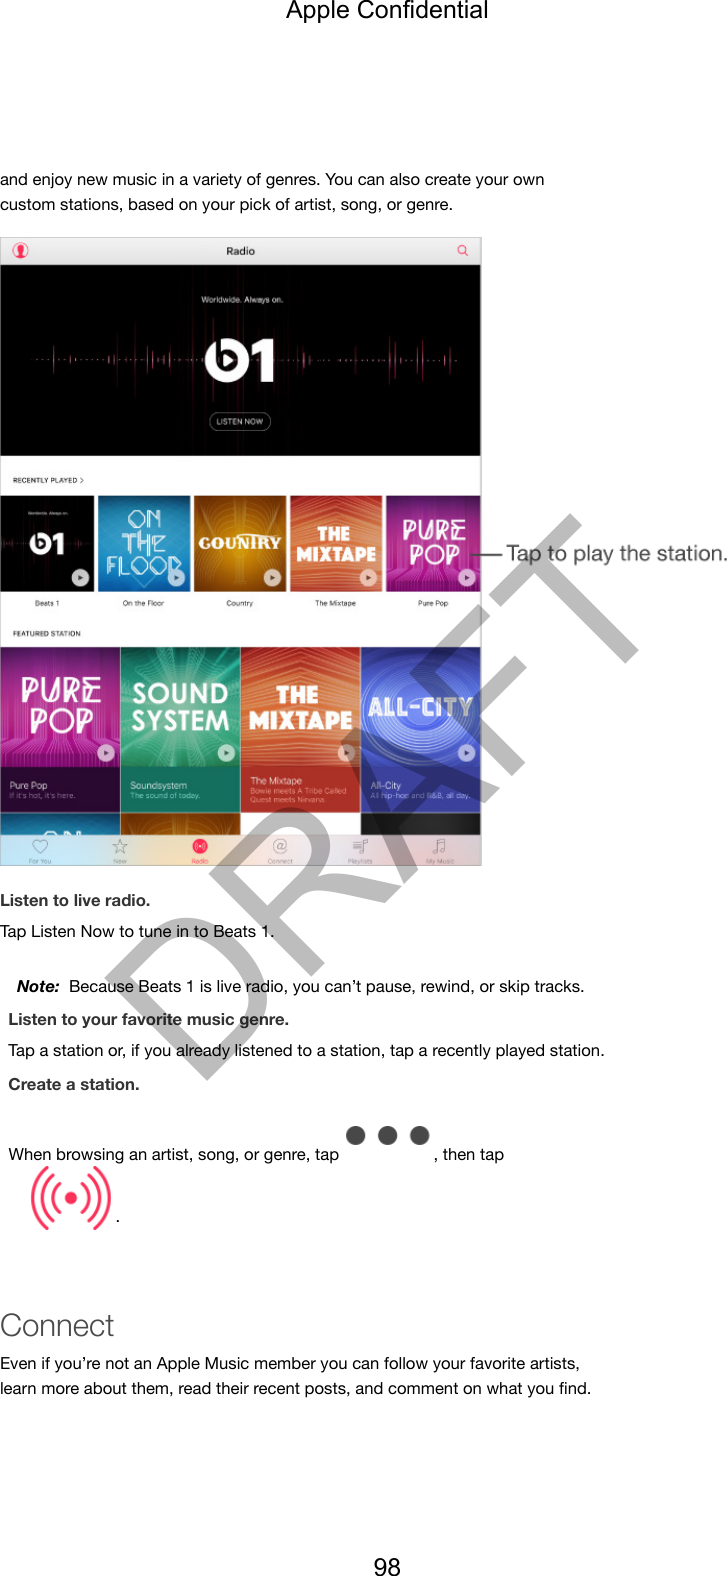 and enjoy new music in a variety of genres. You can also create your owncustom stations, based on your pick of artist, song, or genre.Listen to live radio.Tap Listen Now to tune in to Beats 1.Note:  Because Beats 1 is live radio, you can’t pause, rewind, or skip tracks.Listen to your favorite music genre.Tap a station or, if you already listened to a station, tap a recently played station.Create a station.When browsing an artist, song, or genre, tap  , then tap .ConnectEven if you’re not an Apple Music member you can follow your favorite artists,learn more about them, read their recent posts, and comment on what you ﬁnd.Apple Confidential98DRAFT